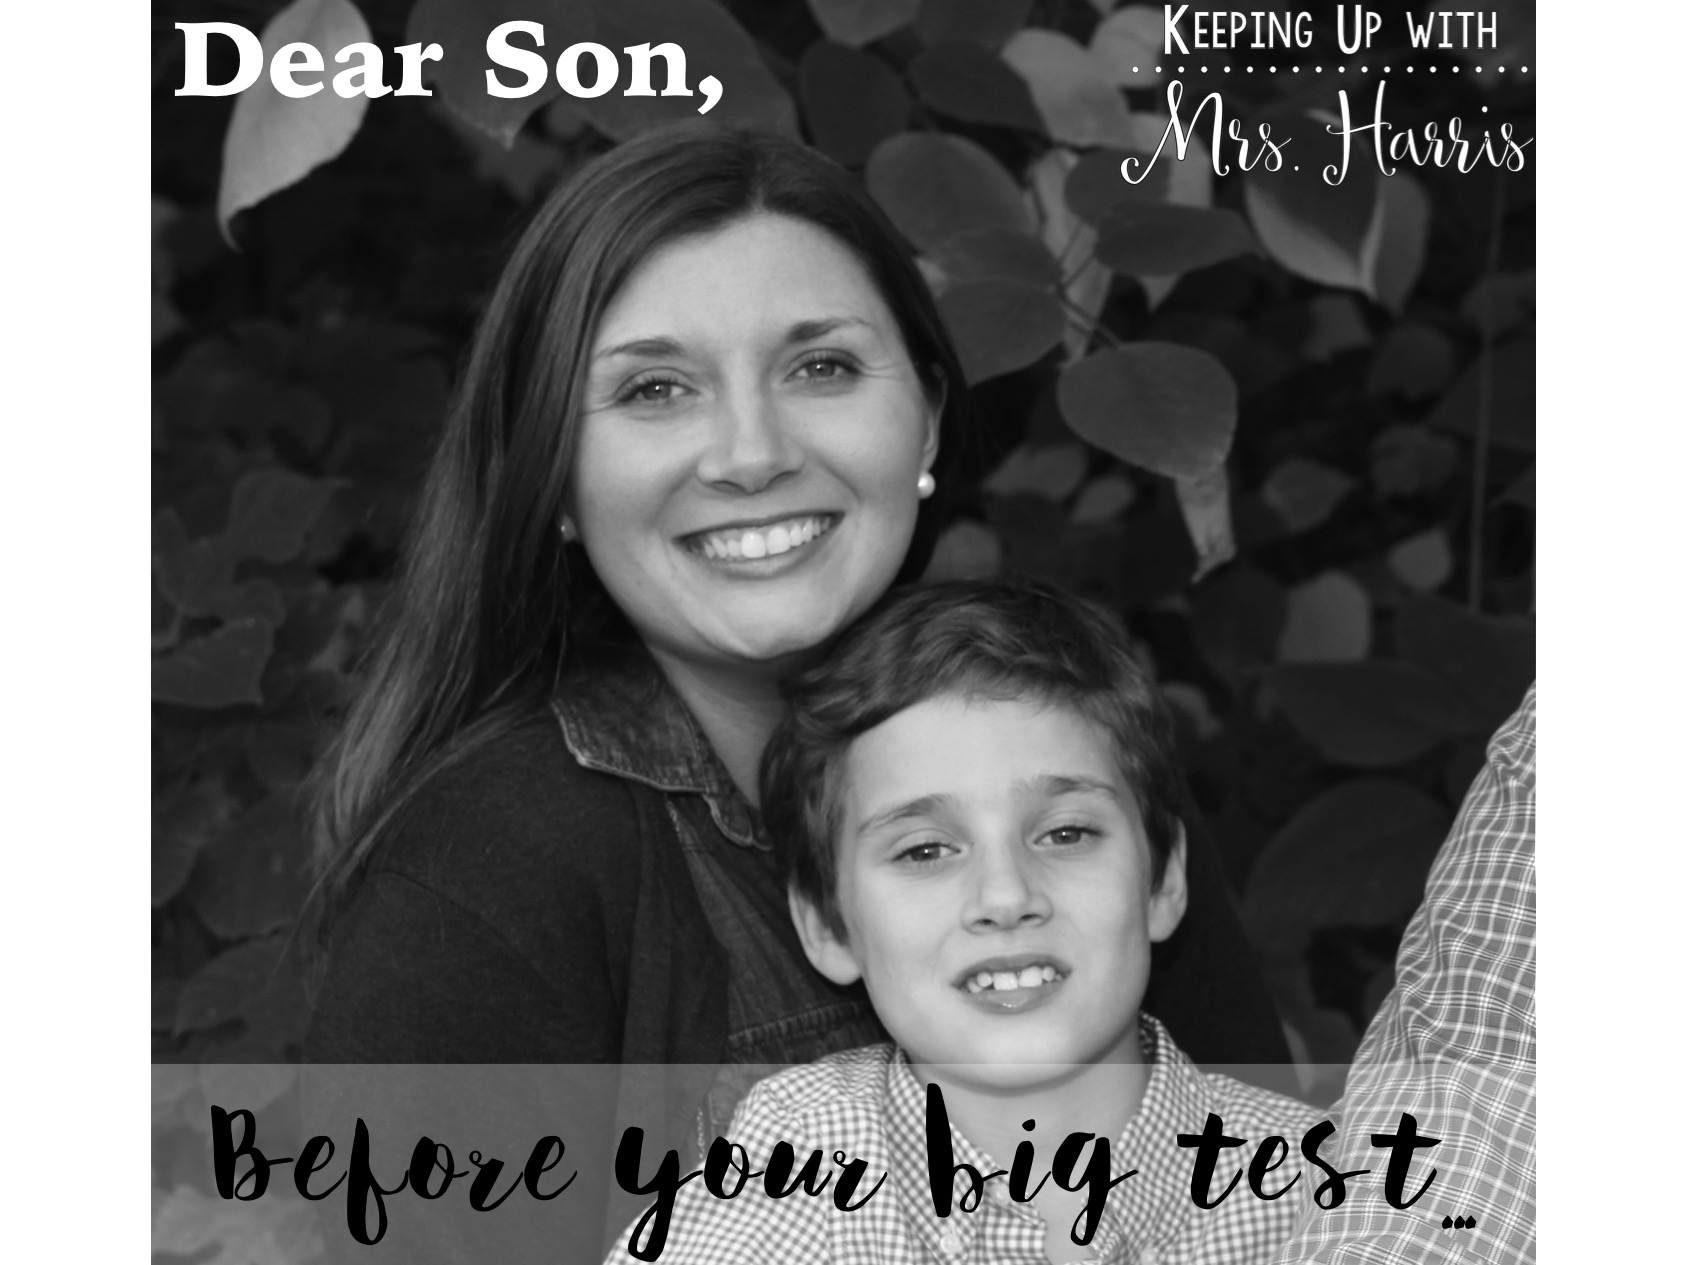 Dear Son, Before Your Big Test